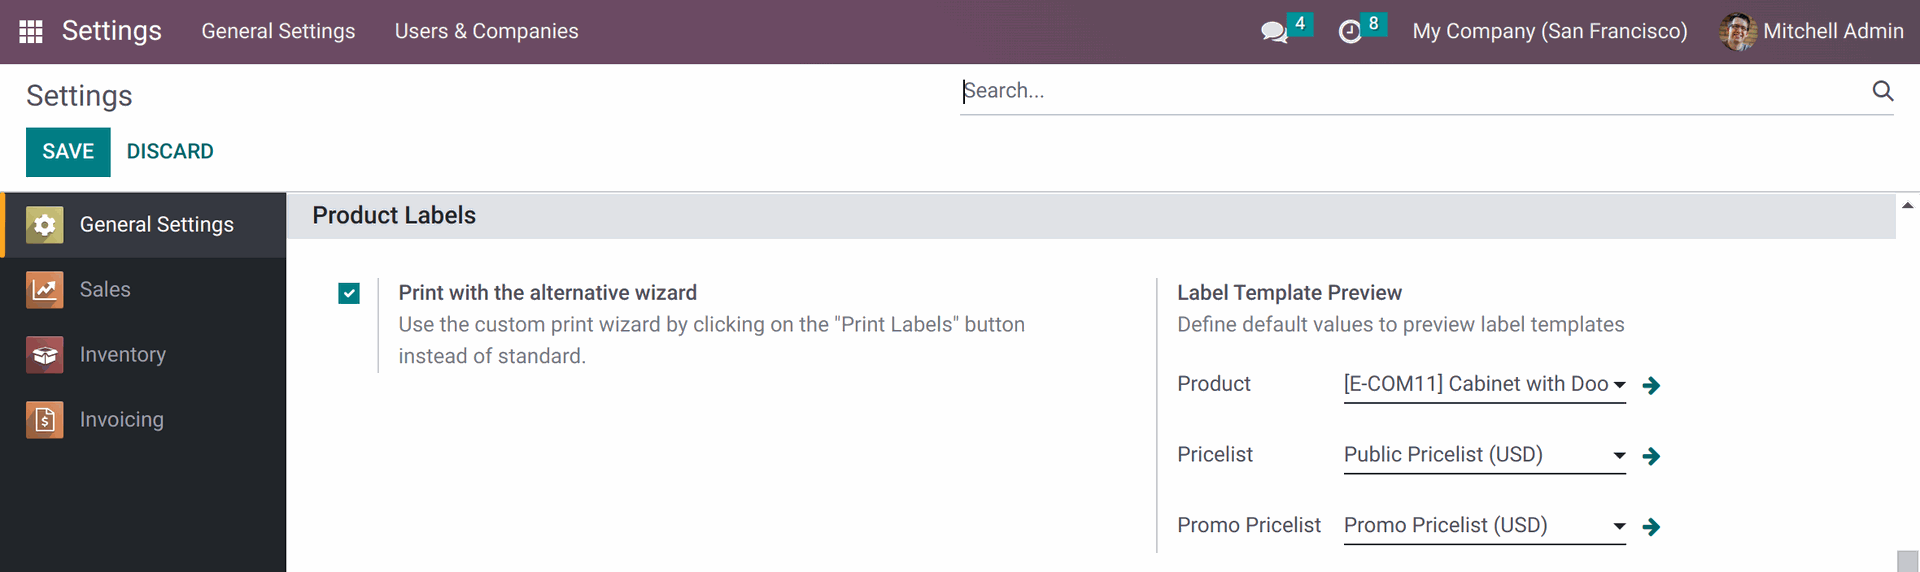 Odoo product label settings for template preview in 17.0